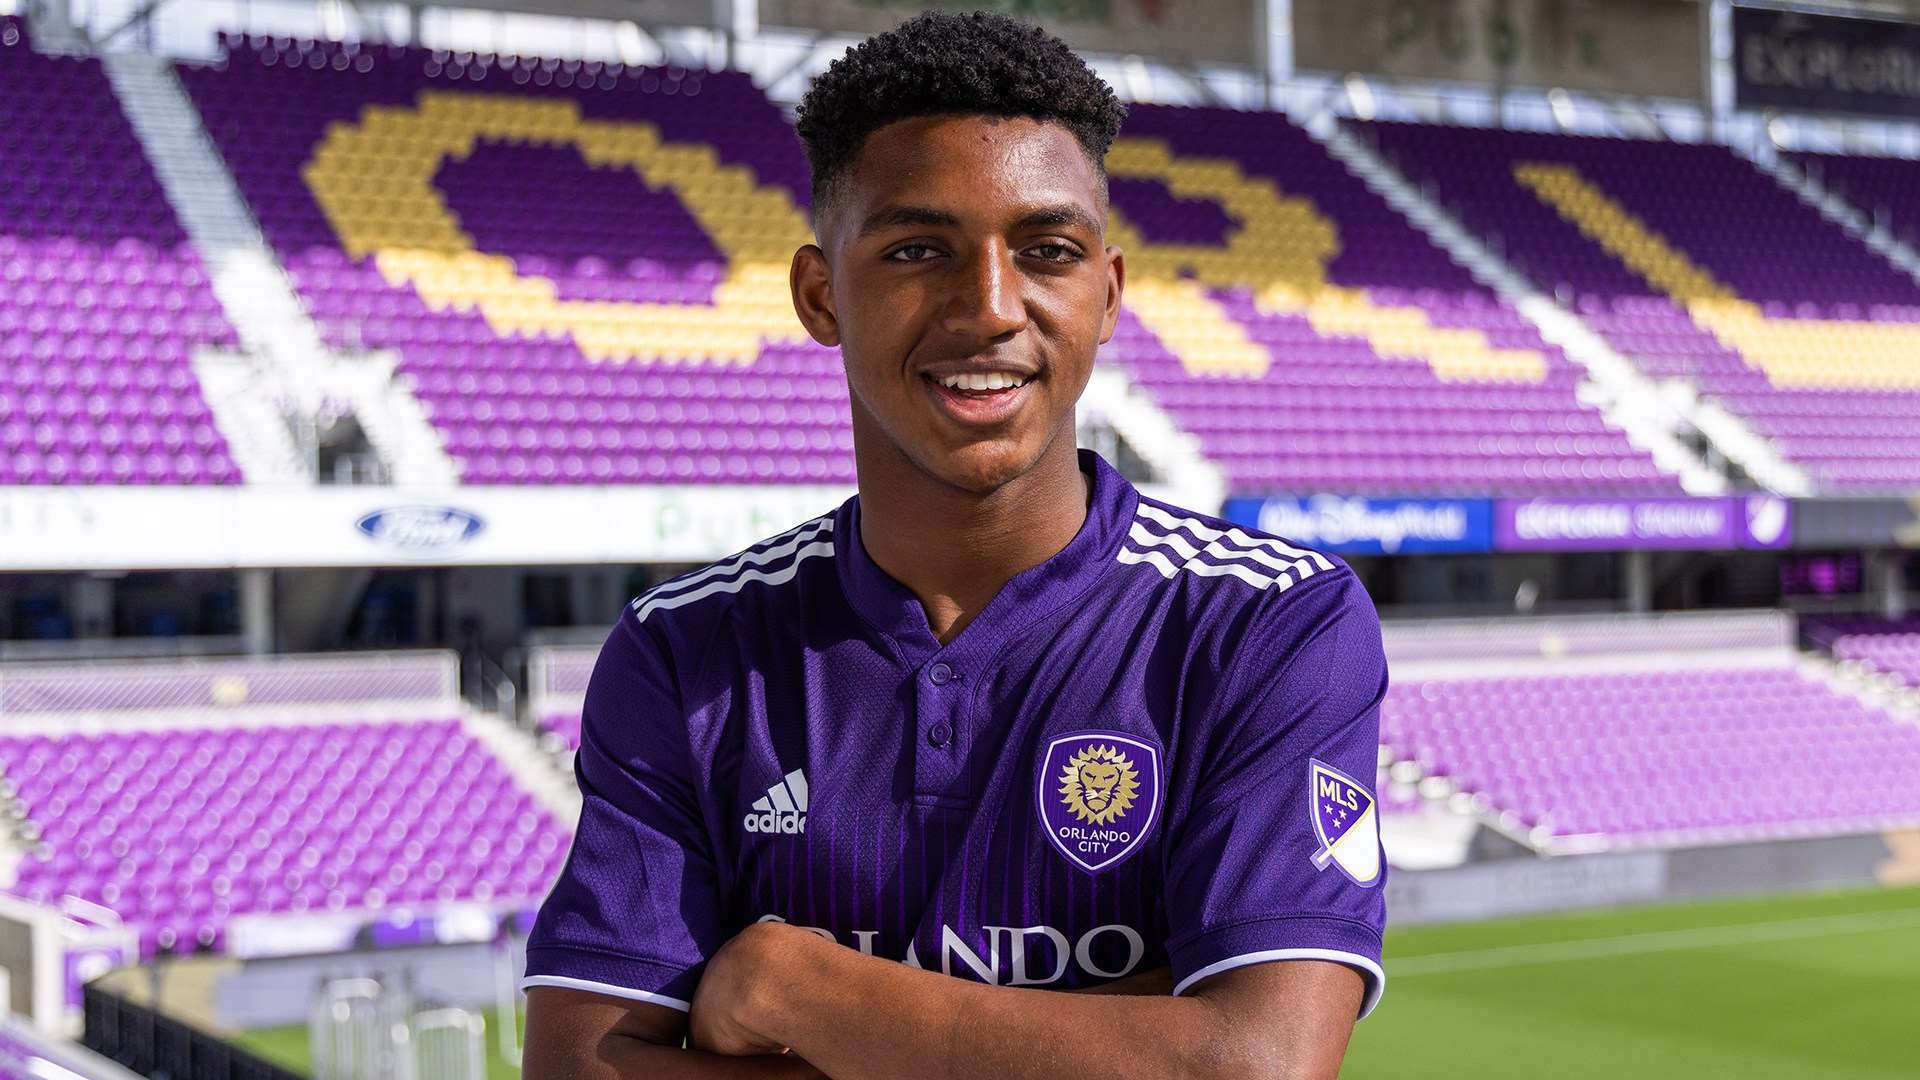 Freeman signs Homegrown deal with Orlando